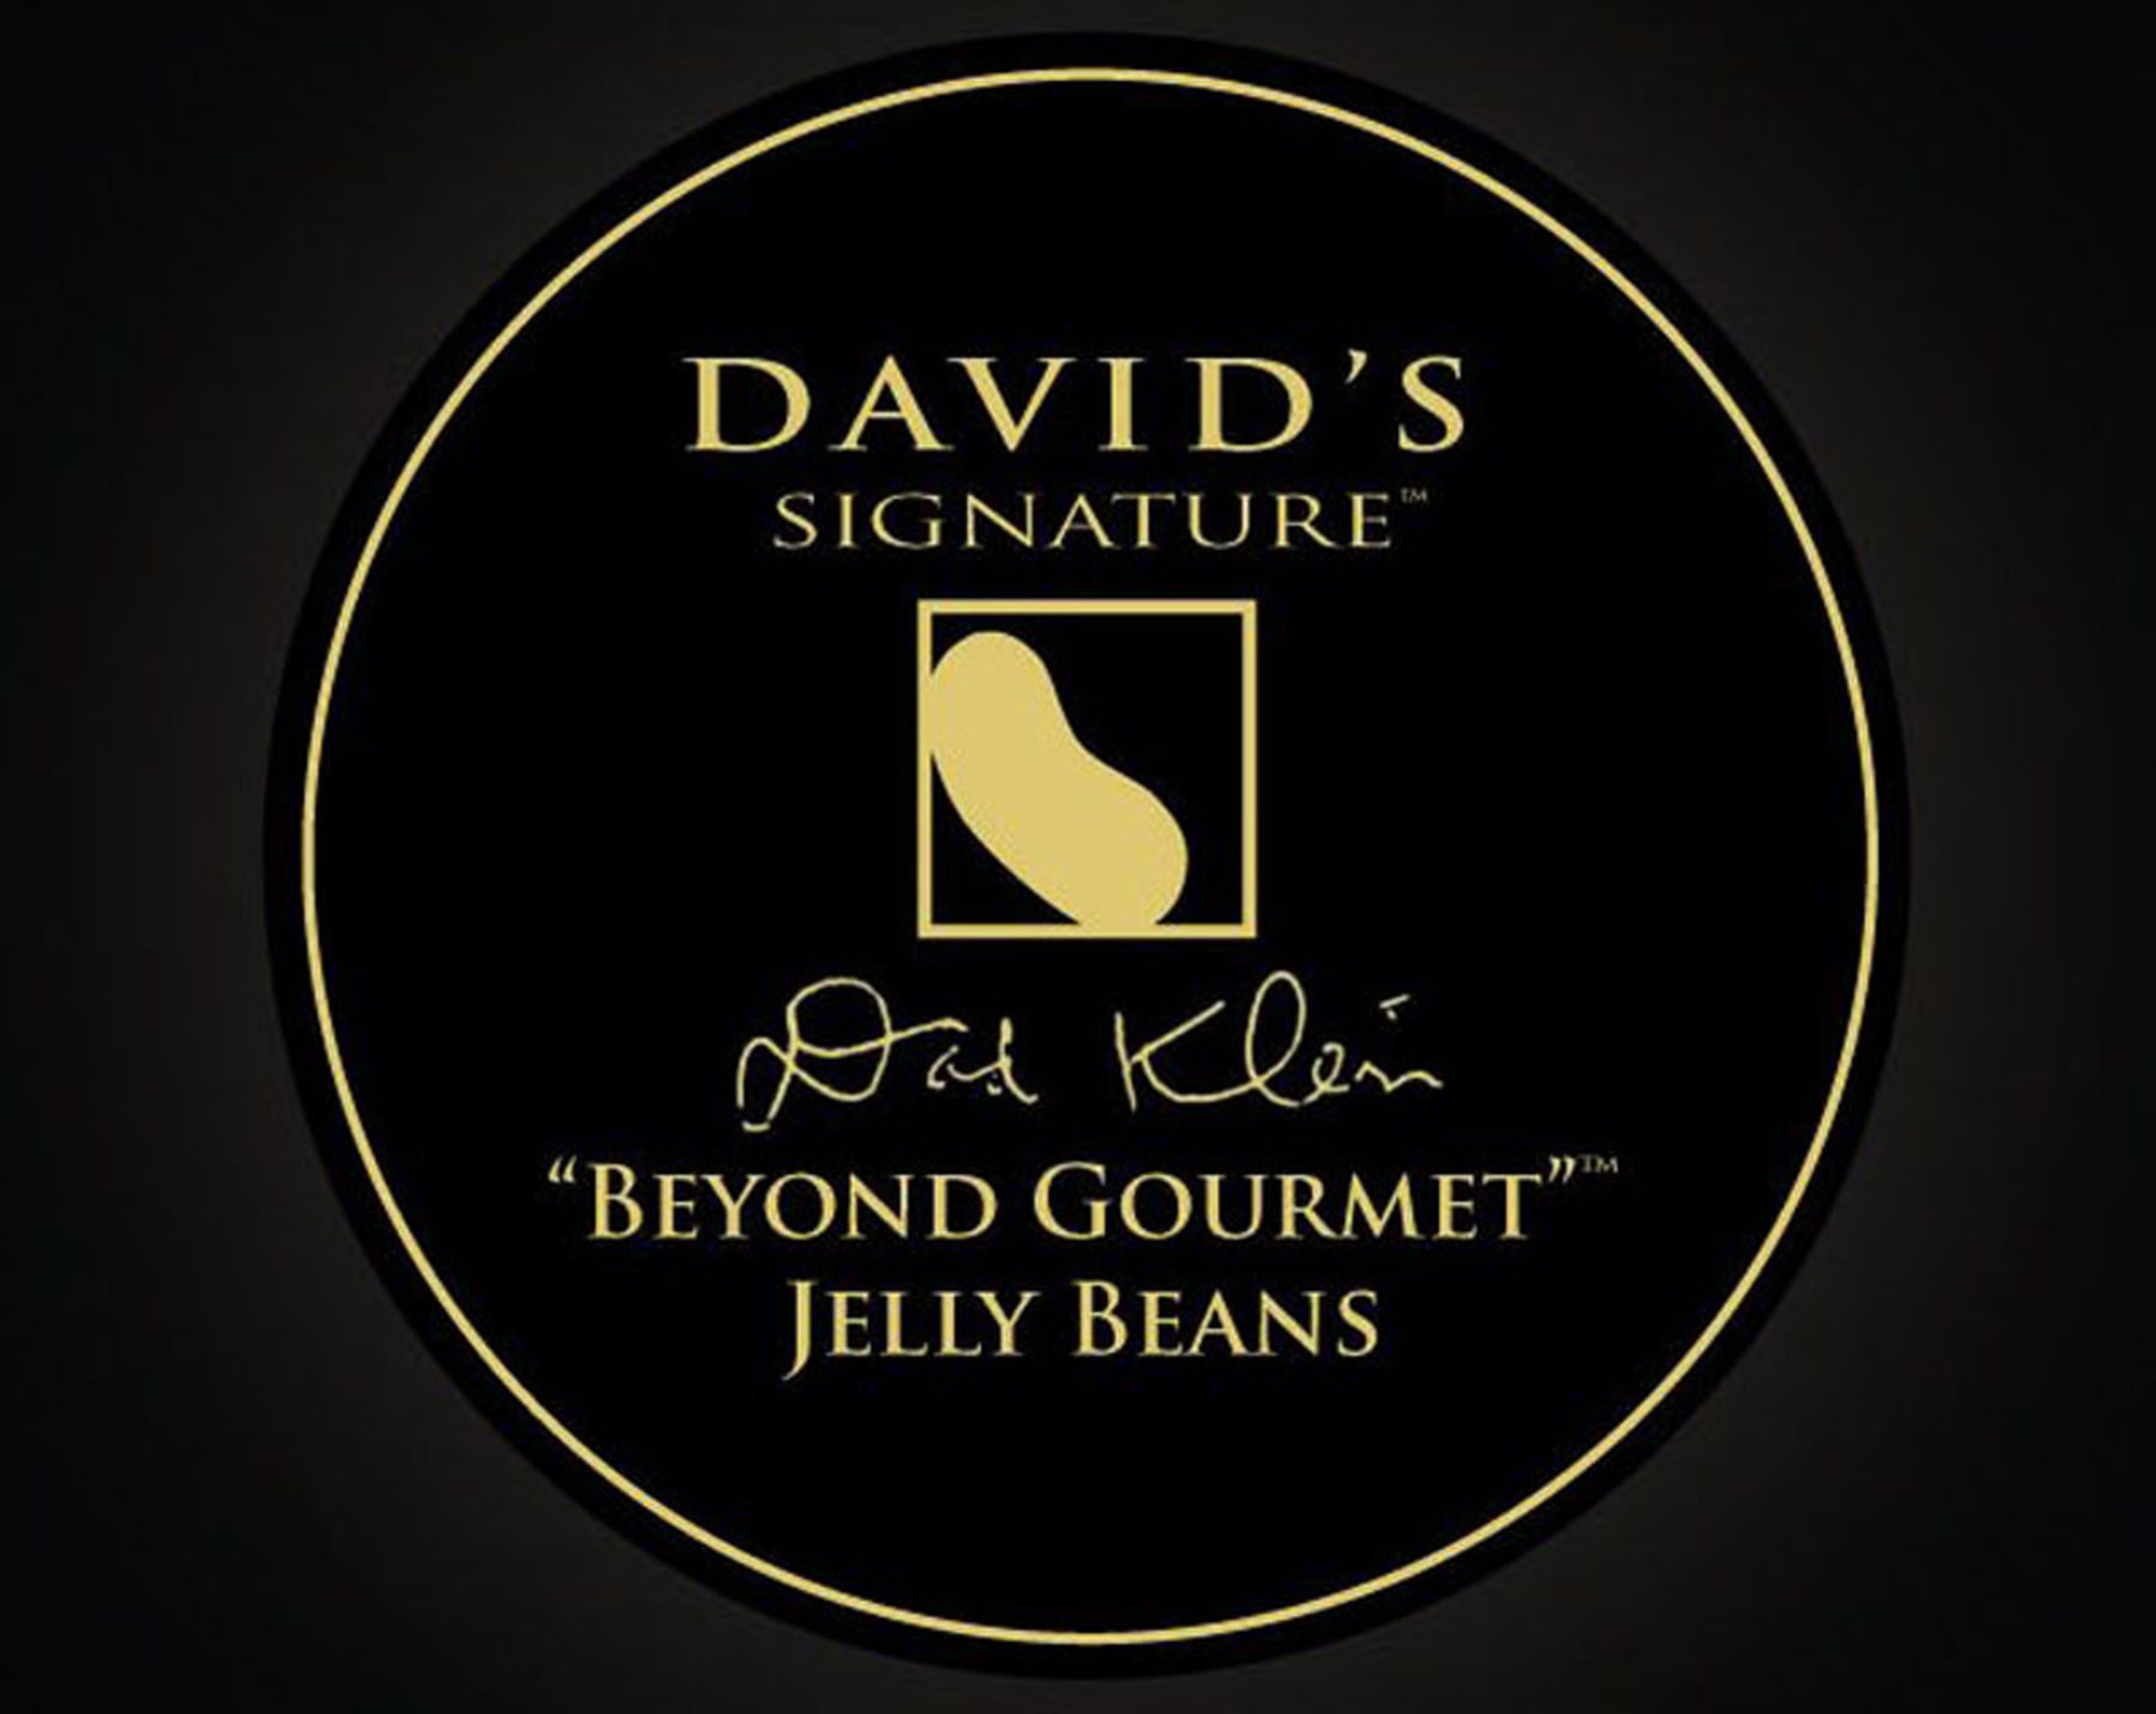 David's Signature "Beyond Gourmet" Jelly Beans(R) are the first true, "beyond gourmet" product on the market. It's the first confectionary product of its kind: blending exotic cuisine and luxury candy. (PRNewsFoto/Leaf Brands, LLC) (PRNewsFoto/LEAF BRANDS, LLC)